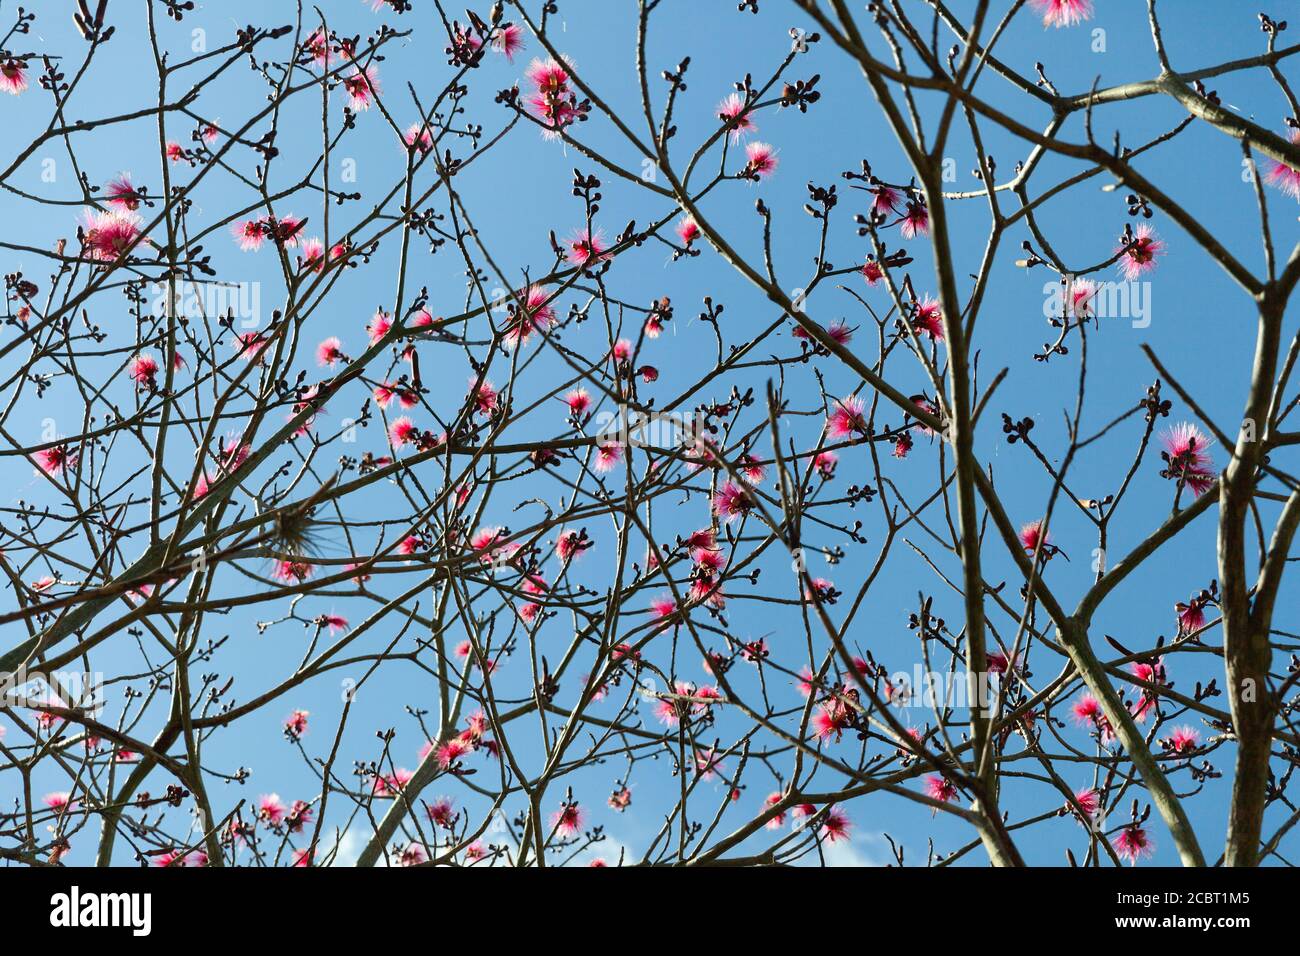 Shaving brush tree (Dr Seuss tree) pattern with blue sky on the background Stock Photo